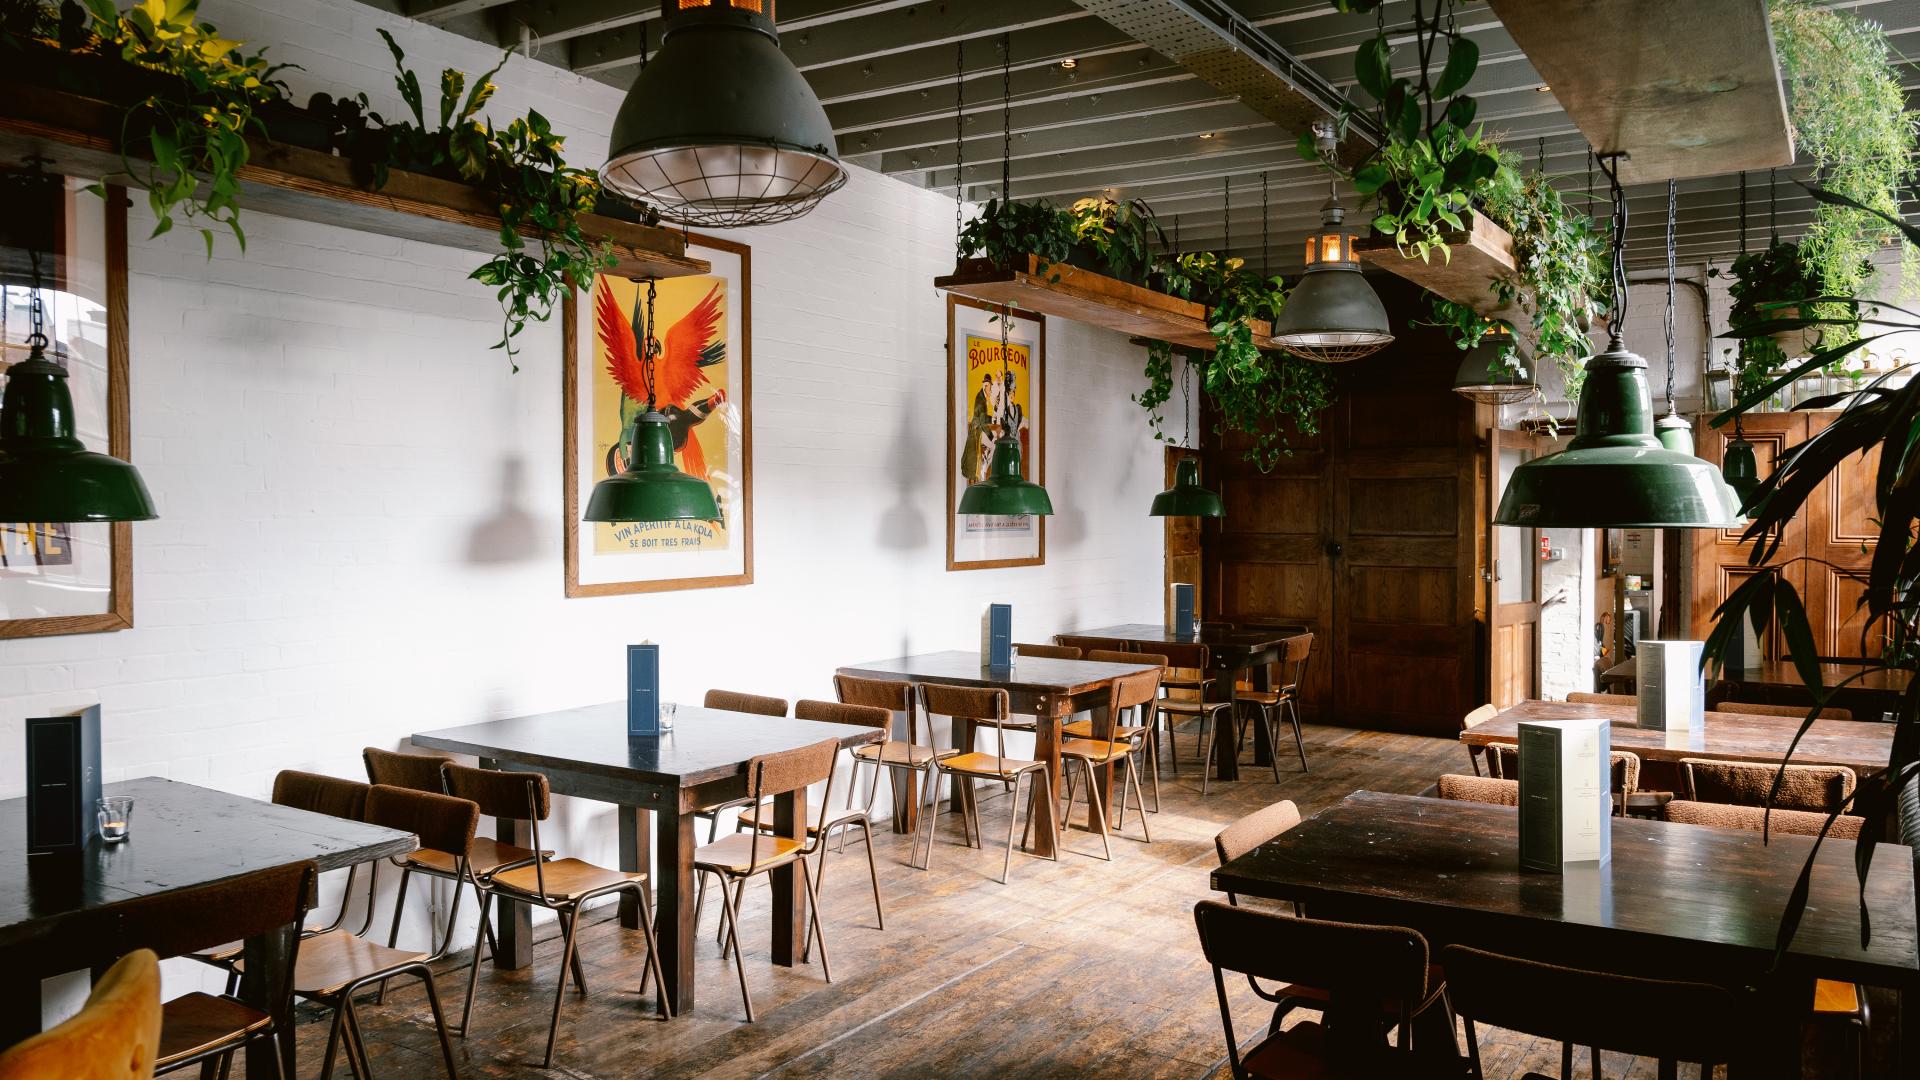 Function Rooms for Hire in Shoreditch